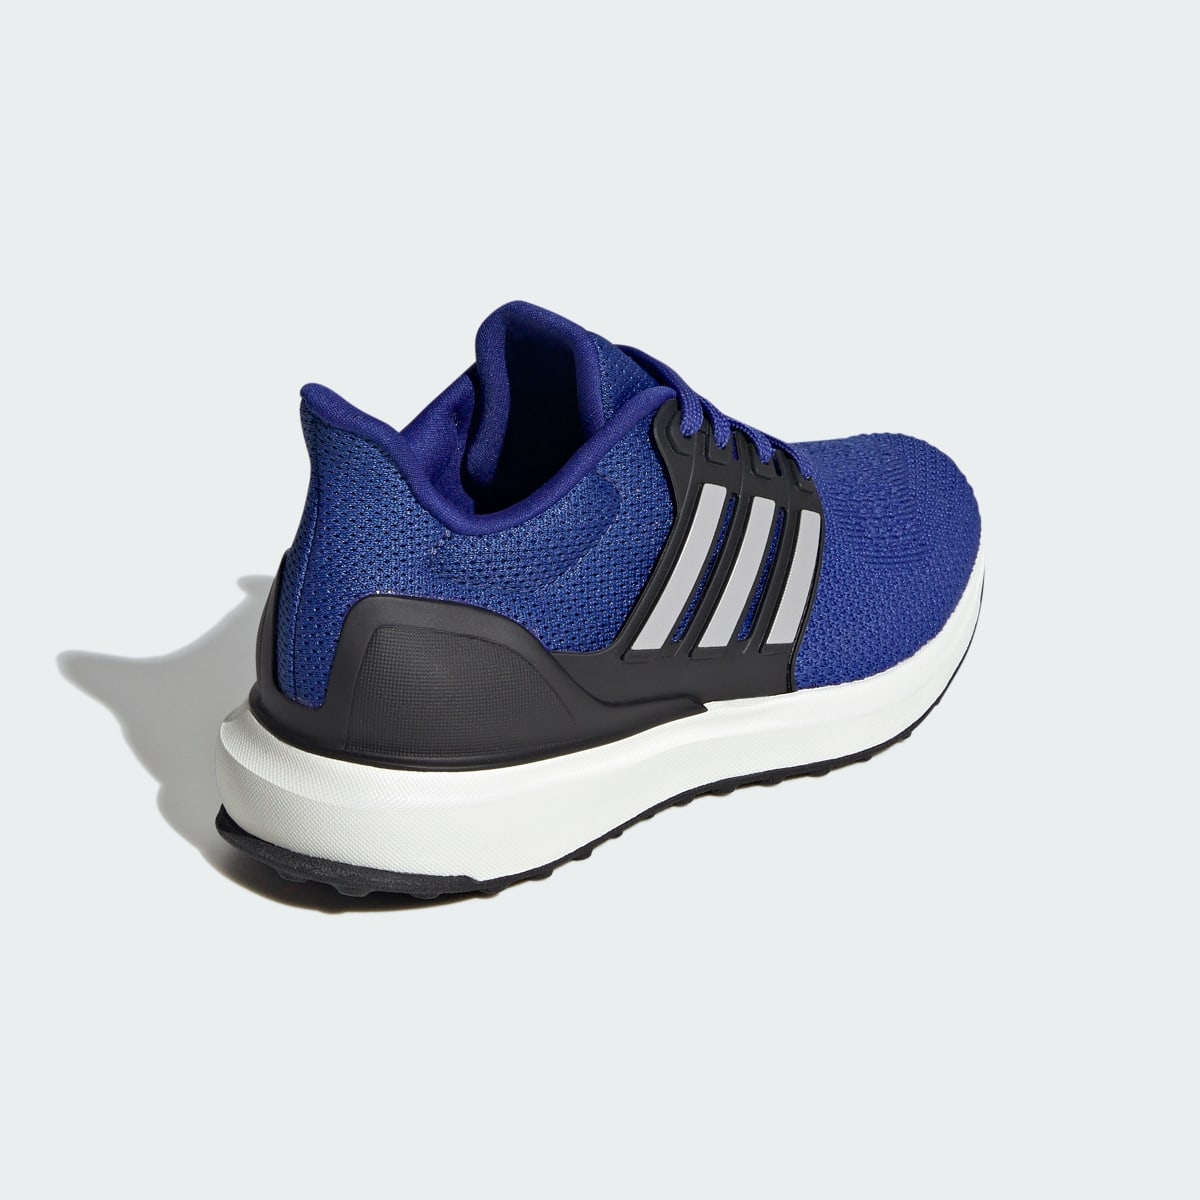 Adidas Chaussure Ubounce DNA Enfants. 6